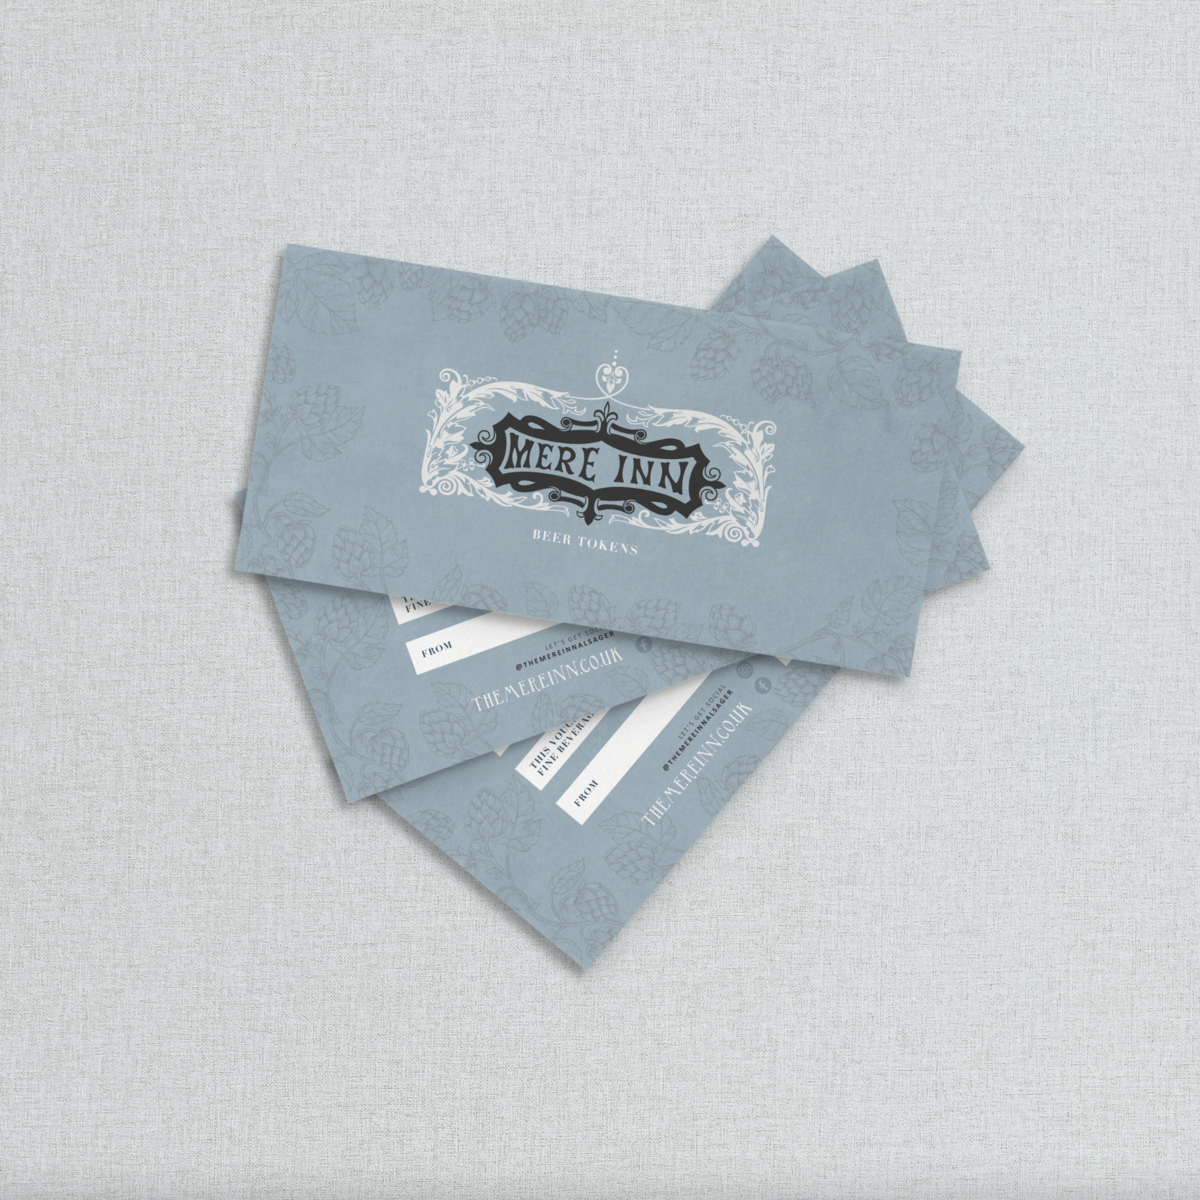 The Mere - Gift vouchers designed and printed by The Little Paper Shop Nantwich